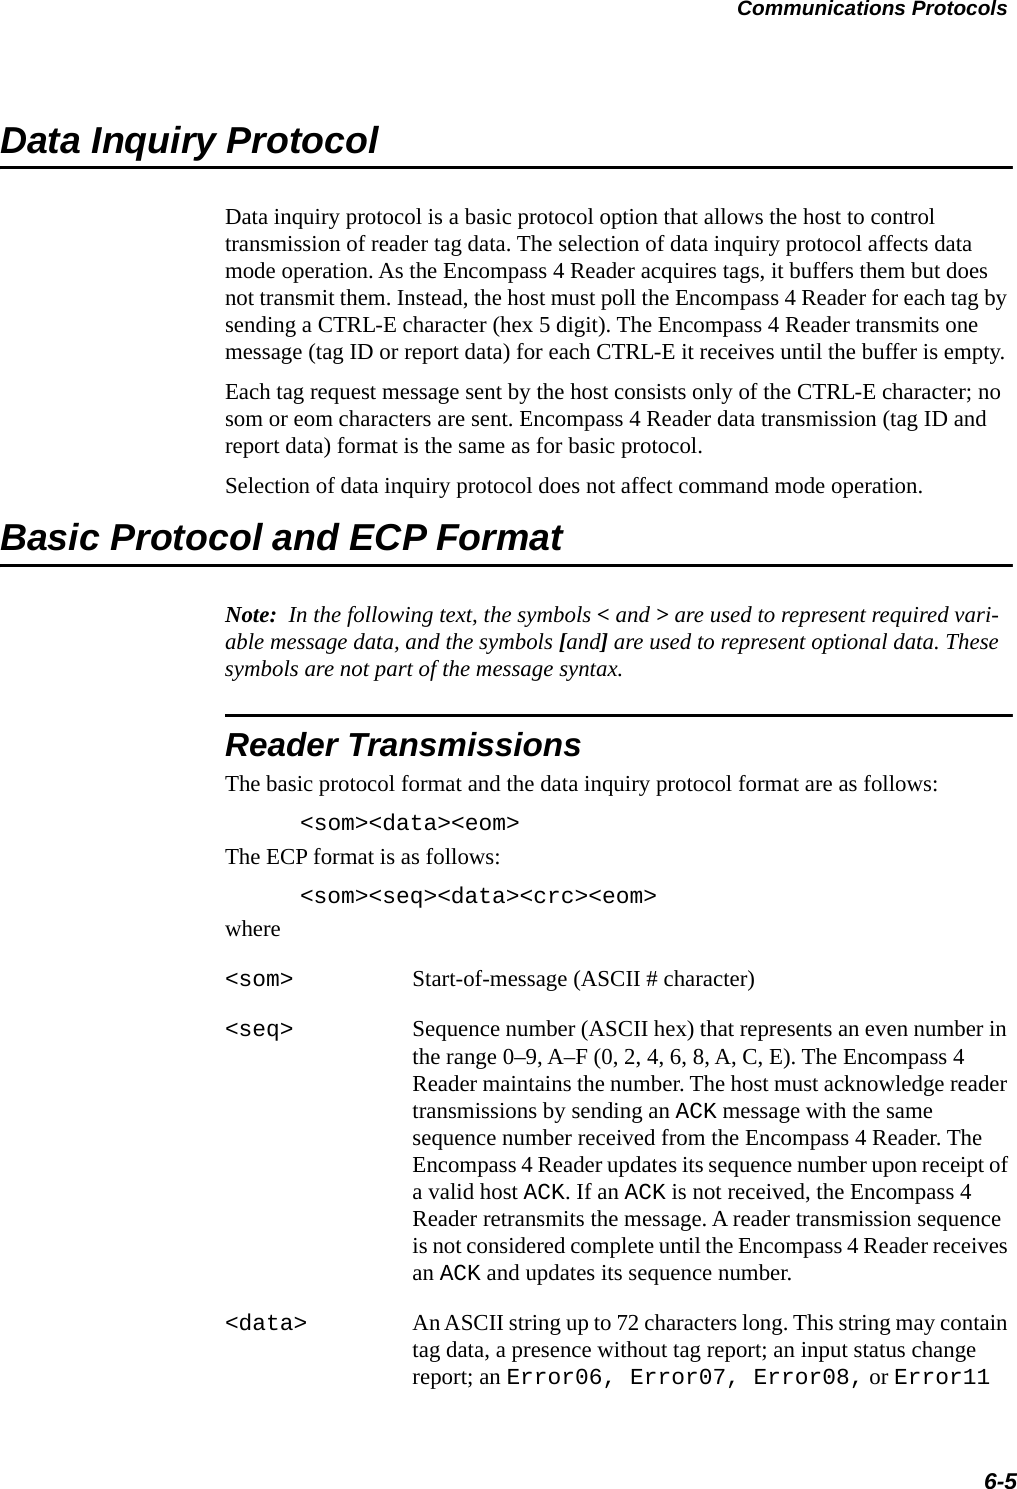 Communications Protocols6-5Data Inquiry ProtocolData inquiry protocol is a basic protocol option that allows the host to control transmission of reader tag data. The selection of data inquiry protocol affects data mode operation. As the Encompass 4 Reader acquires tags, it buffers them but does not transmit them. Instead, the host must poll the Encompass 4 Reader for each tag by sending a CTRL-E character (hex 5 digit). The Encompass 4 Reader transmits one message (tag ID or report data) for each CTRL-E it receives until the buffer is empty.Each tag request message sent by the host consists only of the CTRL-E character; no som or eom characters are sent. Encompass 4 Reader data transmission (tag ID and report data) format is the same as for basic protocol.Selection of data inquiry protocol does not affect command mode operation.Basic Protocol and ECP FormatNote:  In the following text, the symbols &lt; and &gt; are used to represent required vari-able message data, and the symbols [and] are used to represent optional data. These symbols are not part of the message syntax.Reader TransmissionsThe basic protocol format and the data inquiry protocol format are as follows:&lt;som&gt;&lt;data&gt;&lt;eom&gt;The ECP format is as follows:&lt;som&gt;&lt;seq&gt;&lt;data&gt;&lt;crc&gt;&lt;eom&gt;where&lt;som&gt; Start-of-message (ASCII # character)&lt;seq&gt; Sequence number (ASCII hex) that represents an even number in the range 0–9, A–F (0, 2, 4, 6, 8, A, C, E). The Encompass 4 Reader maintains the number. The host must acknowledge reader transmissions by sending an ACK message with the same sequence number received from the Encompass 4 Reader. The Encompass 4 Reader updates its sequence number upon receipt of a valid host ACK. If an ACK is not received, the Encompass 4 Reader retransmits the message. A reader transmission sequence is not considered complete until the Encompass 4 Reader receives an ACK and updates its sequence number.&lt;data&gt; An ASCII string up to 72 characters long. This string may contain tag data, a presence without tag report; an input status change report; an Error06, Error07, Error08, or Error11 